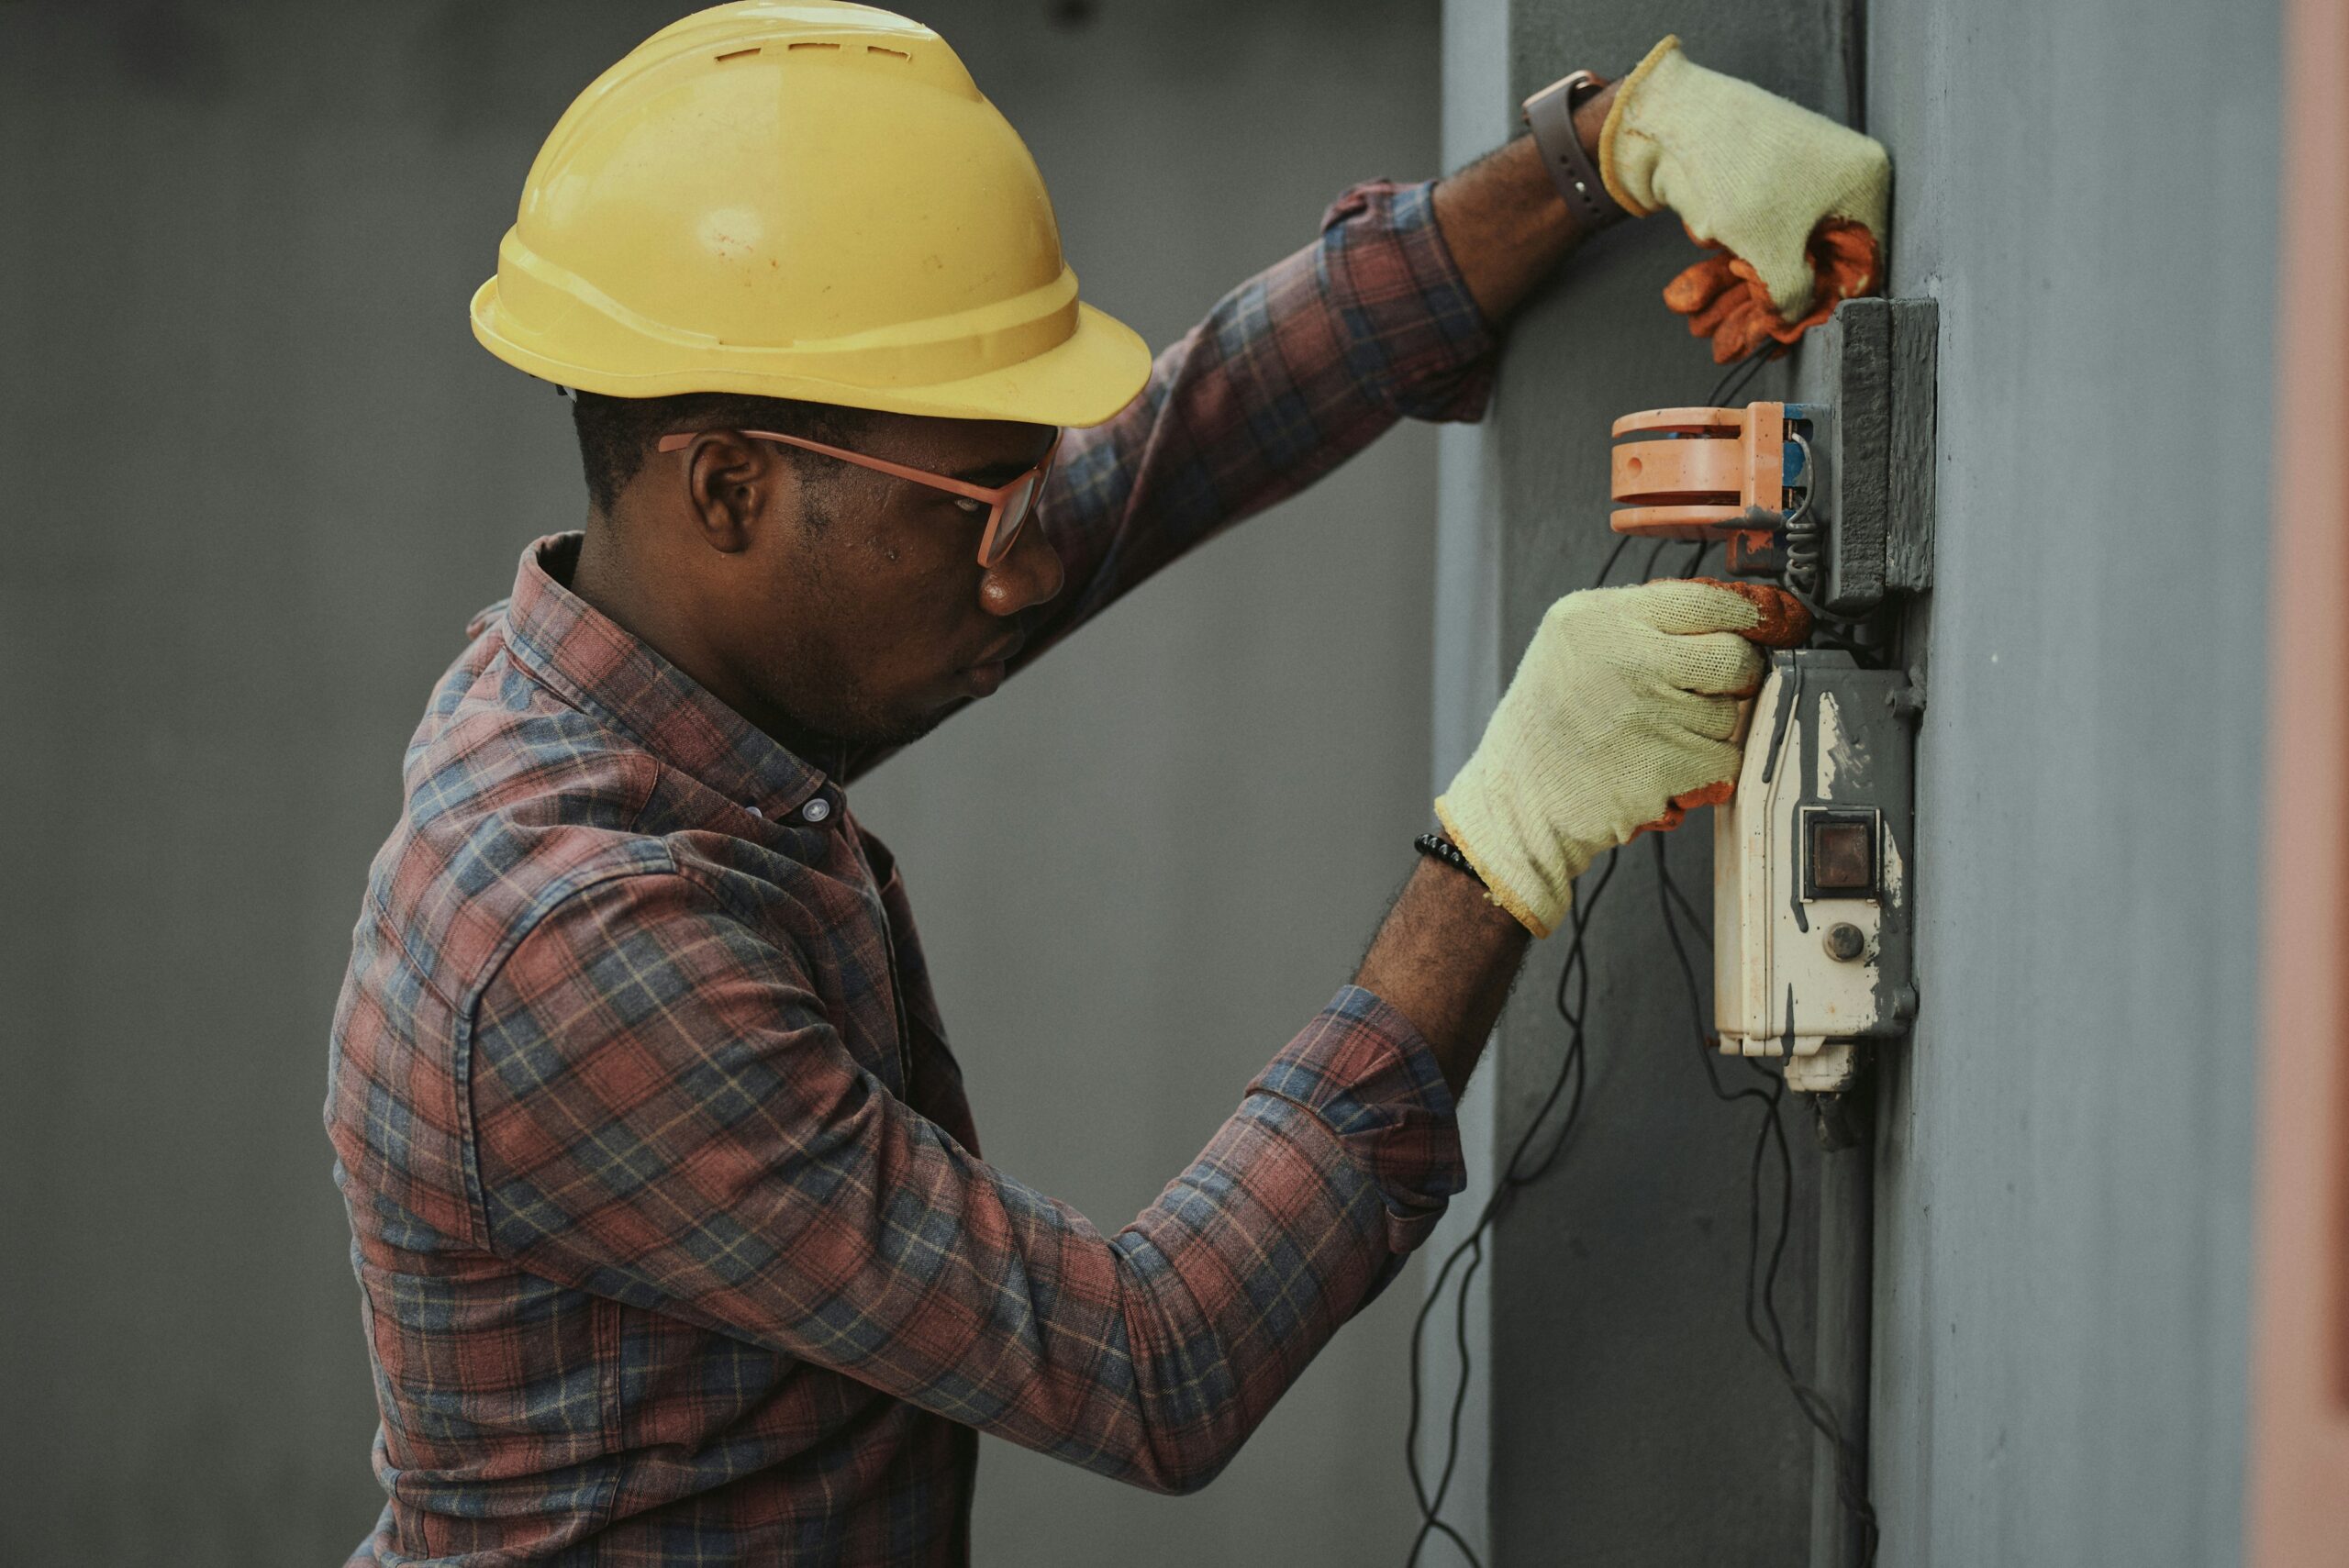 Man working on an electrical box with tools and safety equipment